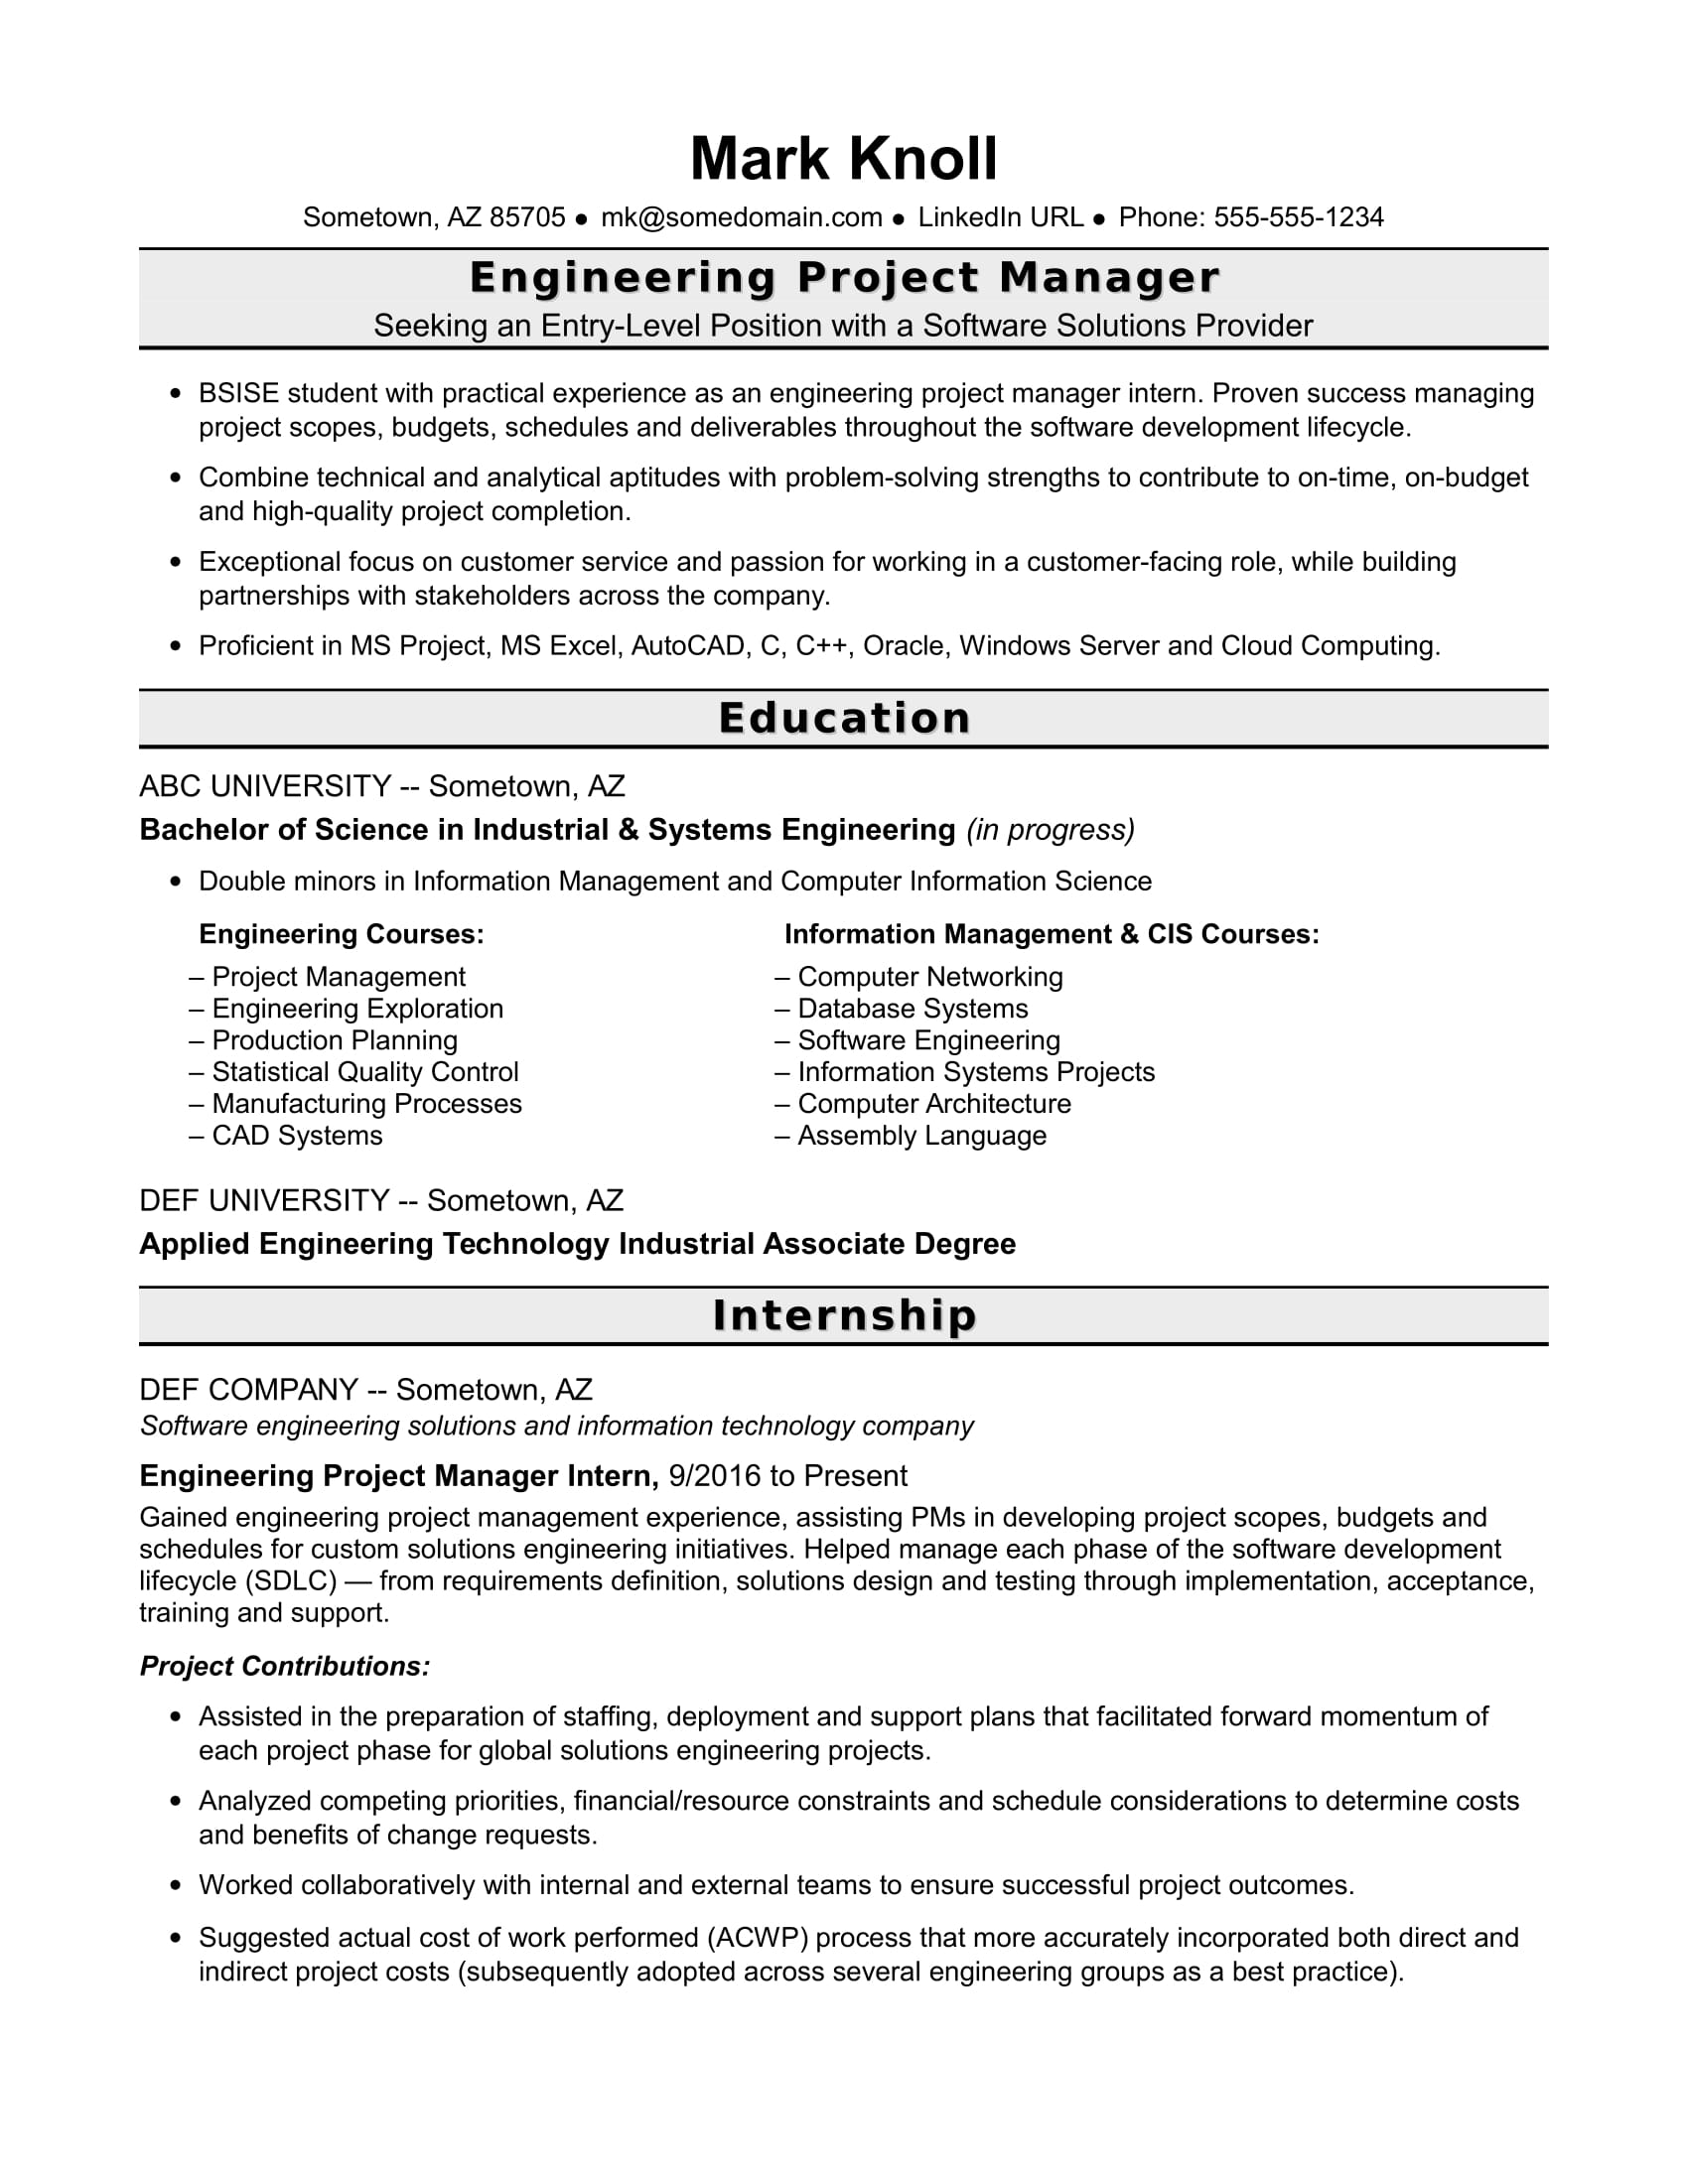 Resume Sample Of Engineering Manager Engineering Manager Resume